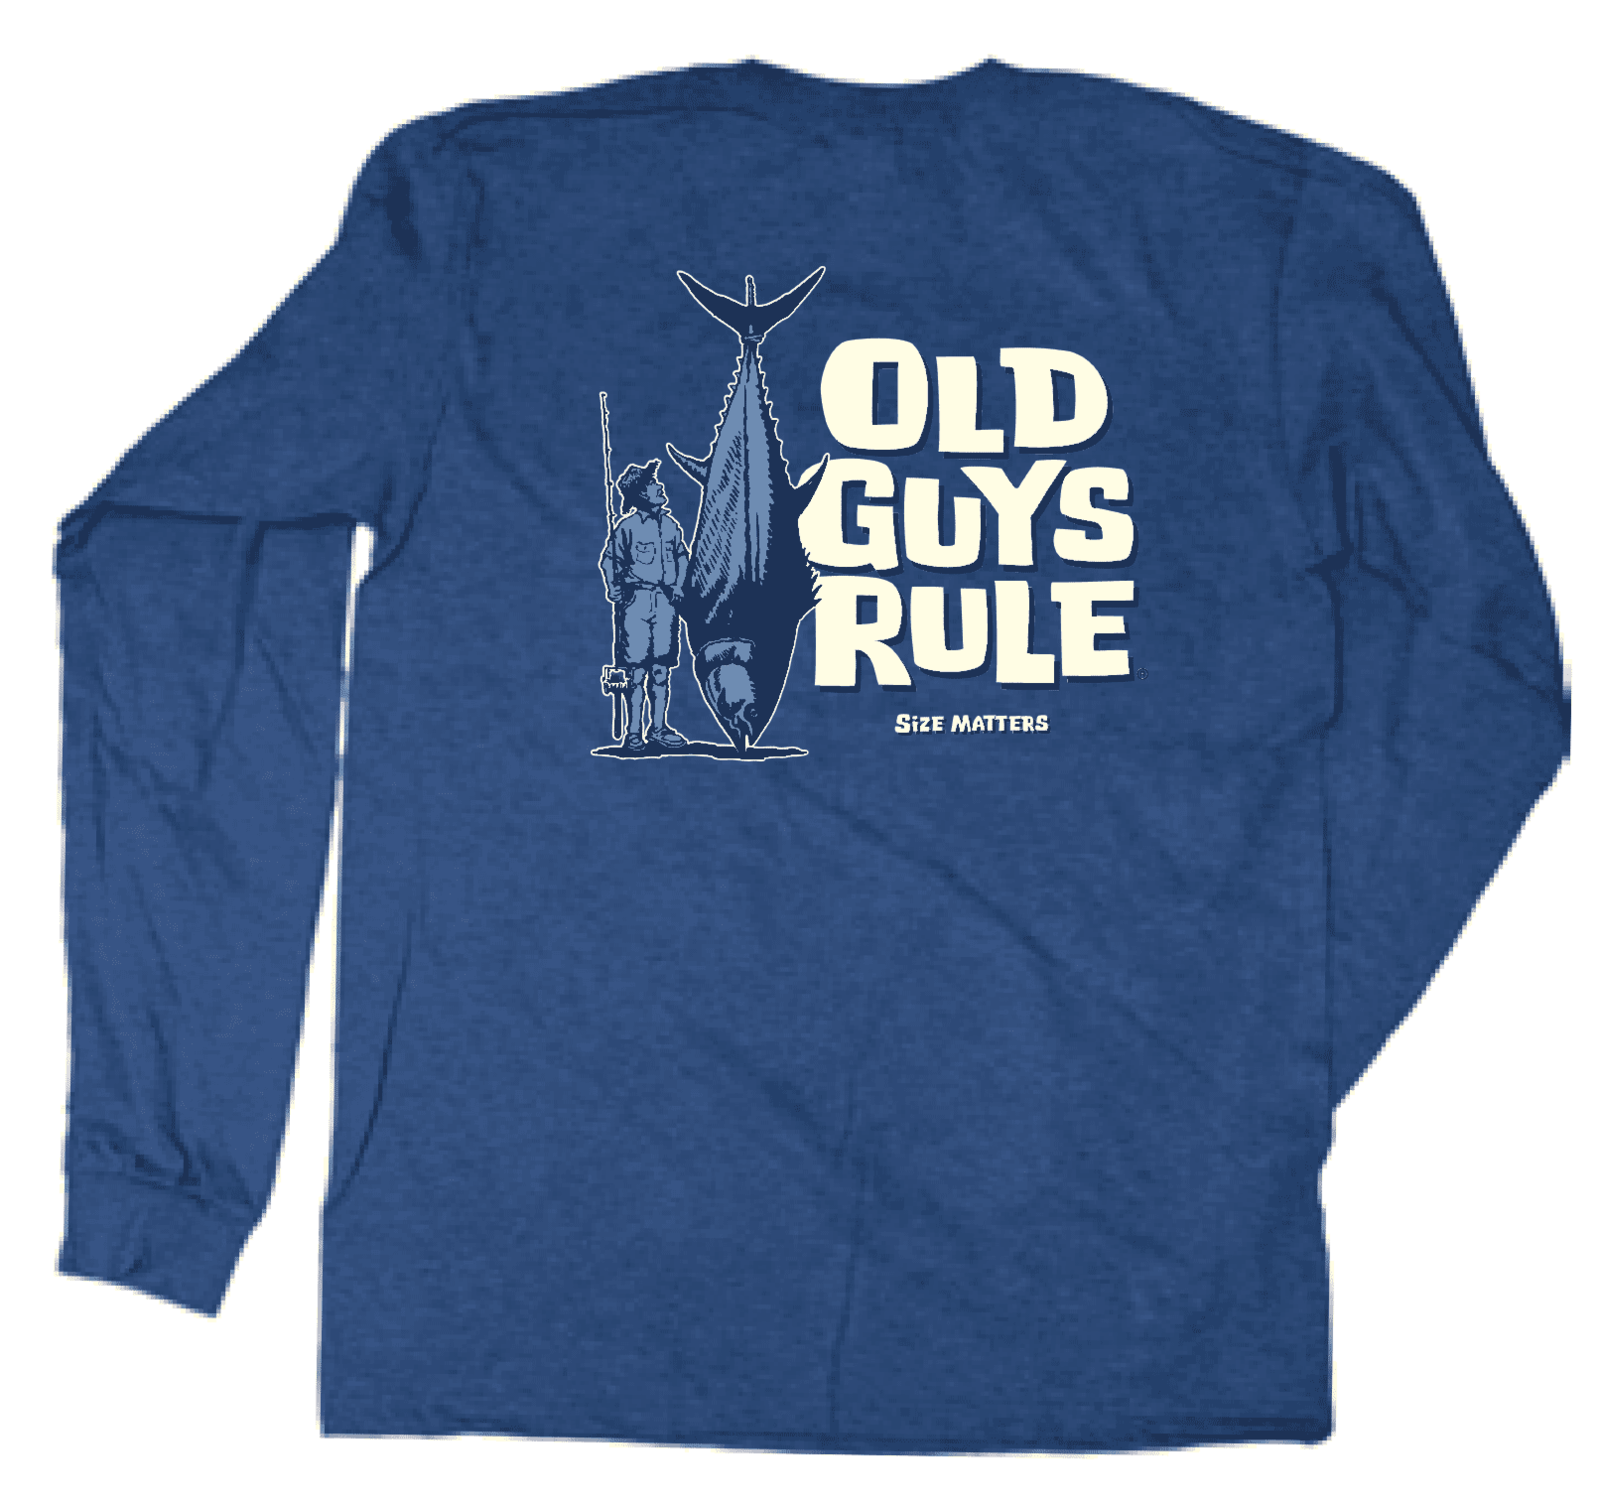 Old Guys Rule size matters nvy long slv t-shirt